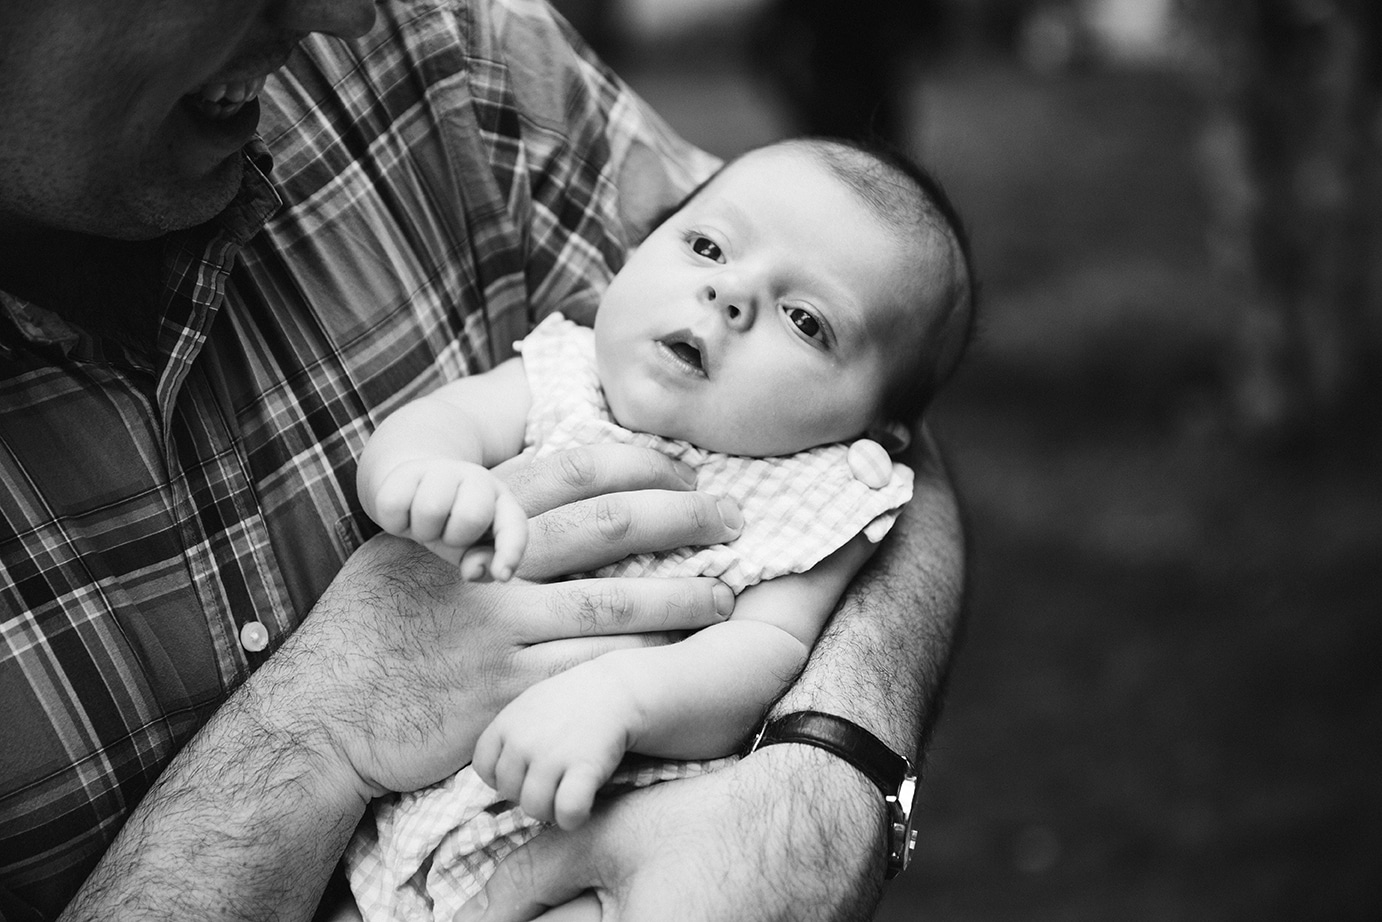 A documentary photograph of guests holding a baby during a Friendly Crossways Wedding